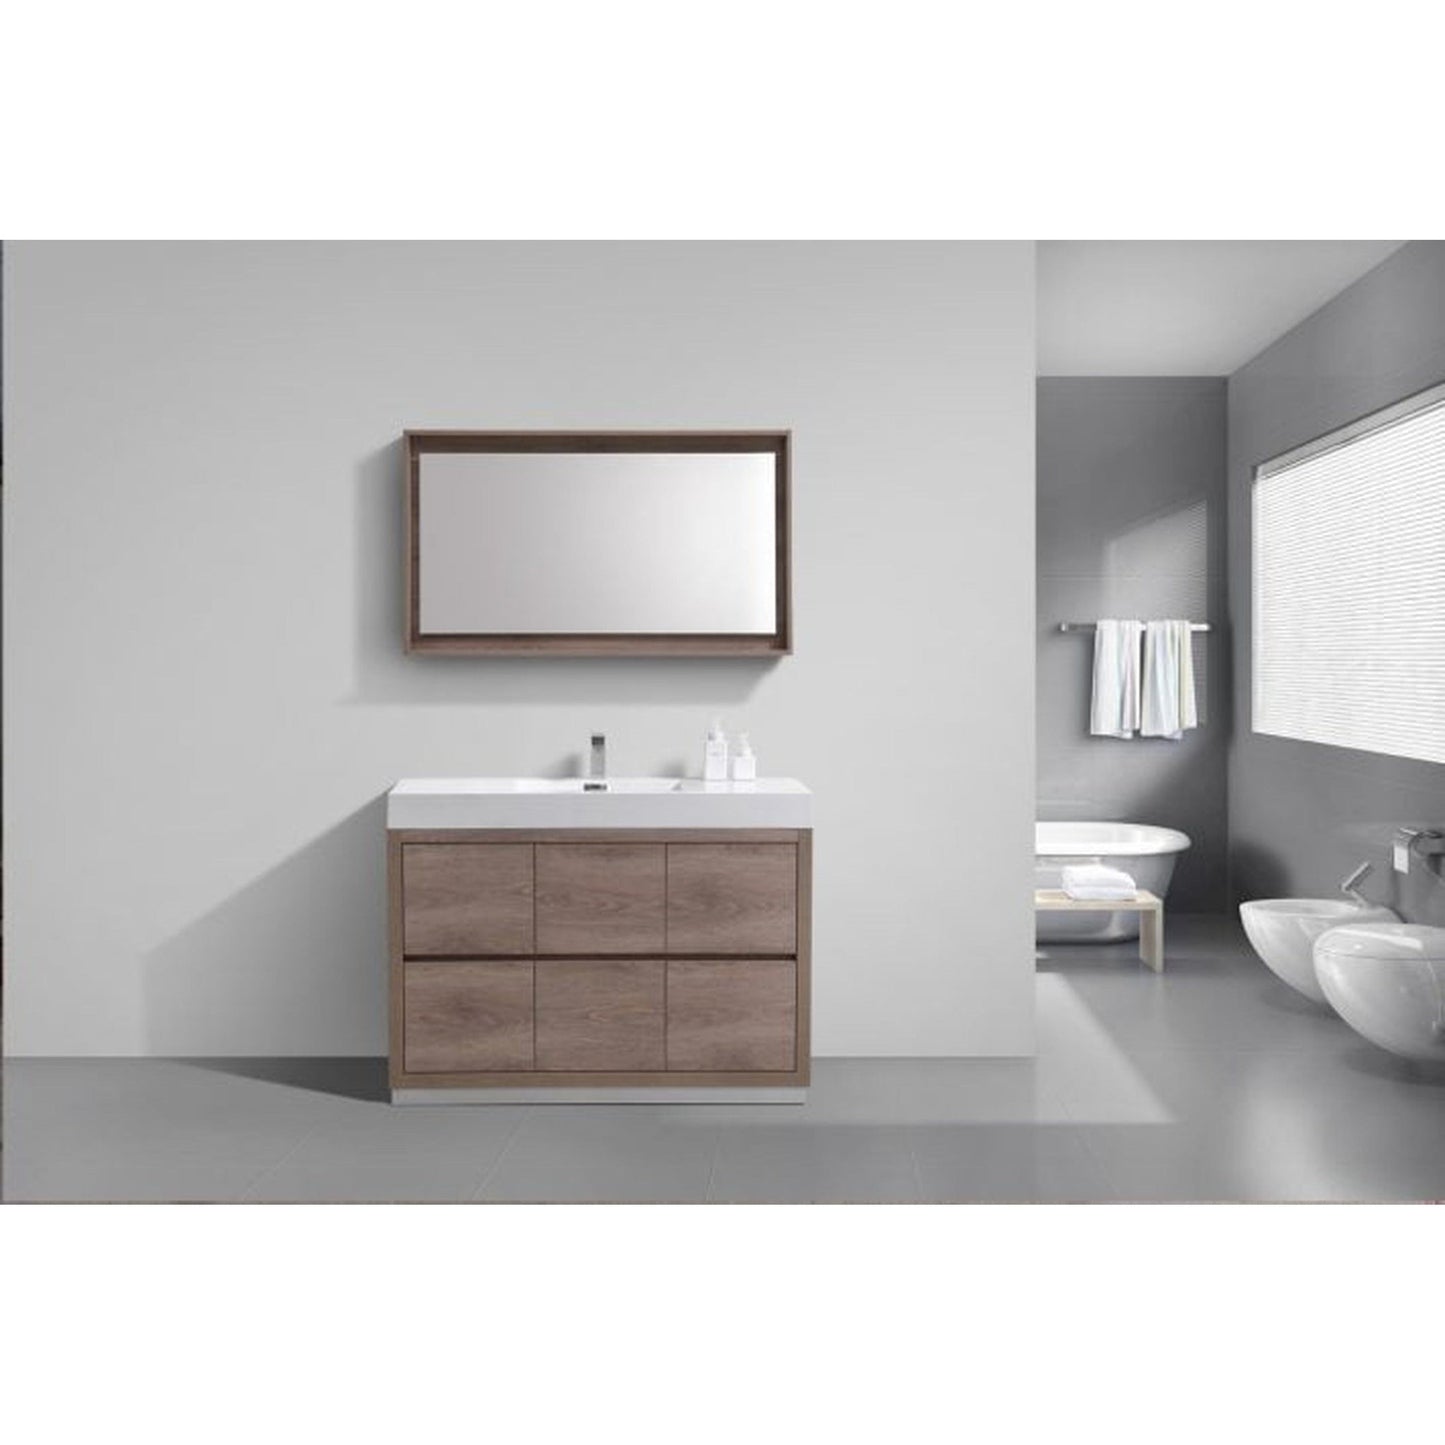 KubeBath Bliss 48" Butternut Freestanding Modern Bathroom Vanity With Single Integrated Acrylic Sink With Overflow and 48" Butternut Framed Mirror With Shelf